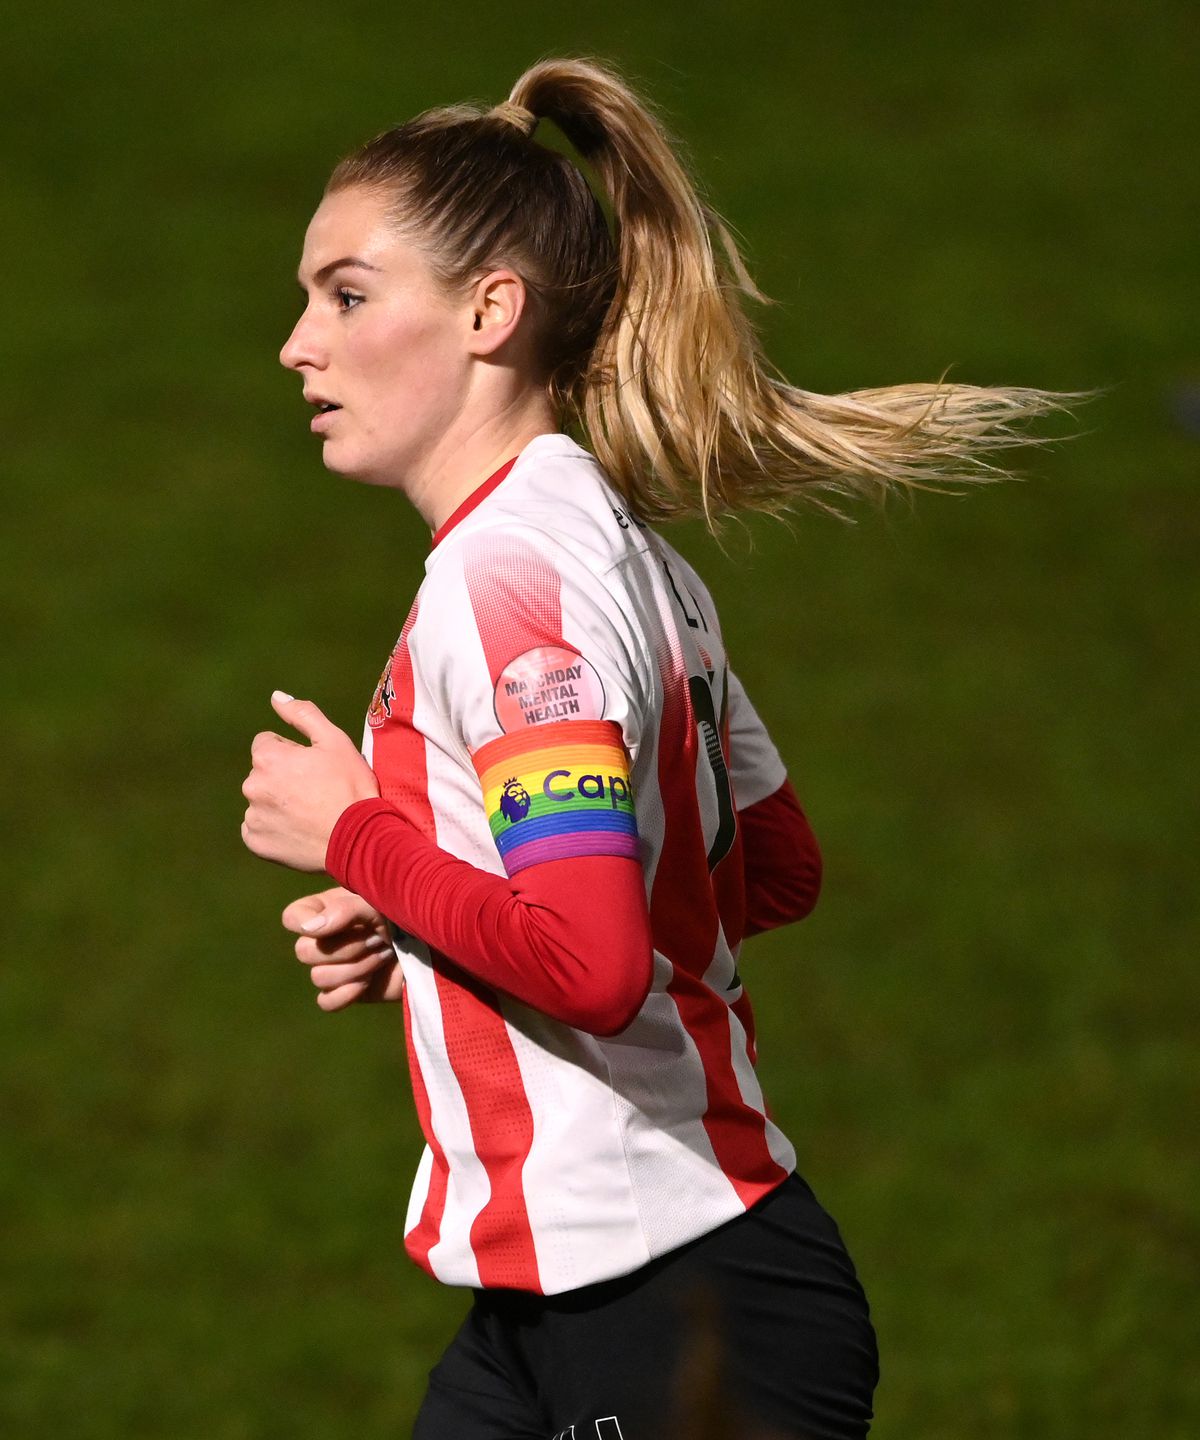 Sunderland Ladies v Liverpool Women- FA Women’s Continental Tyres League Cup